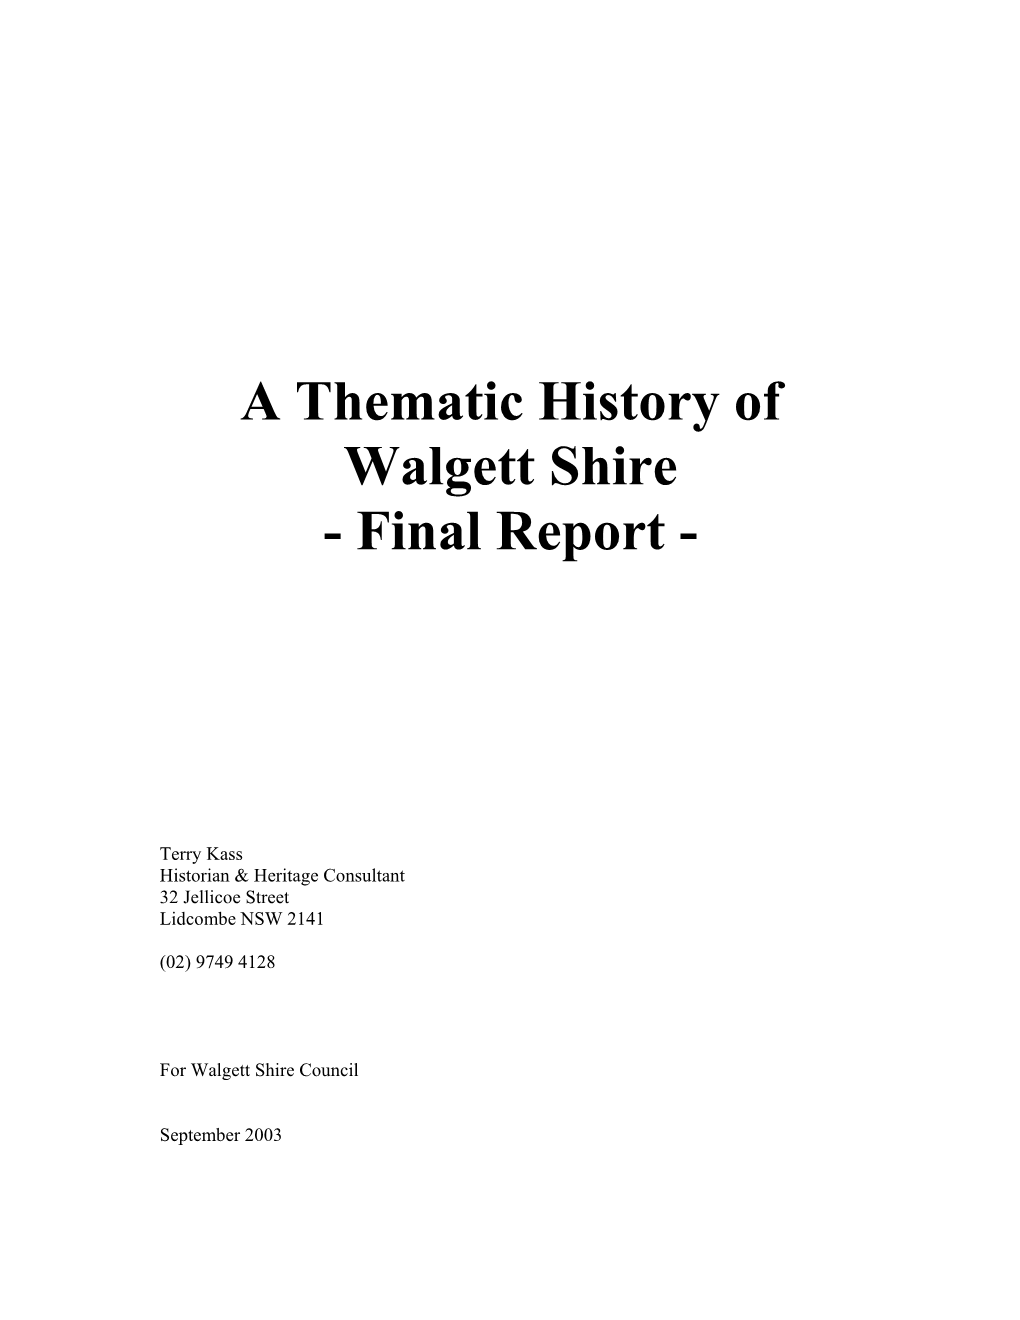 A Thematic History of Walgett Shire - Final Report